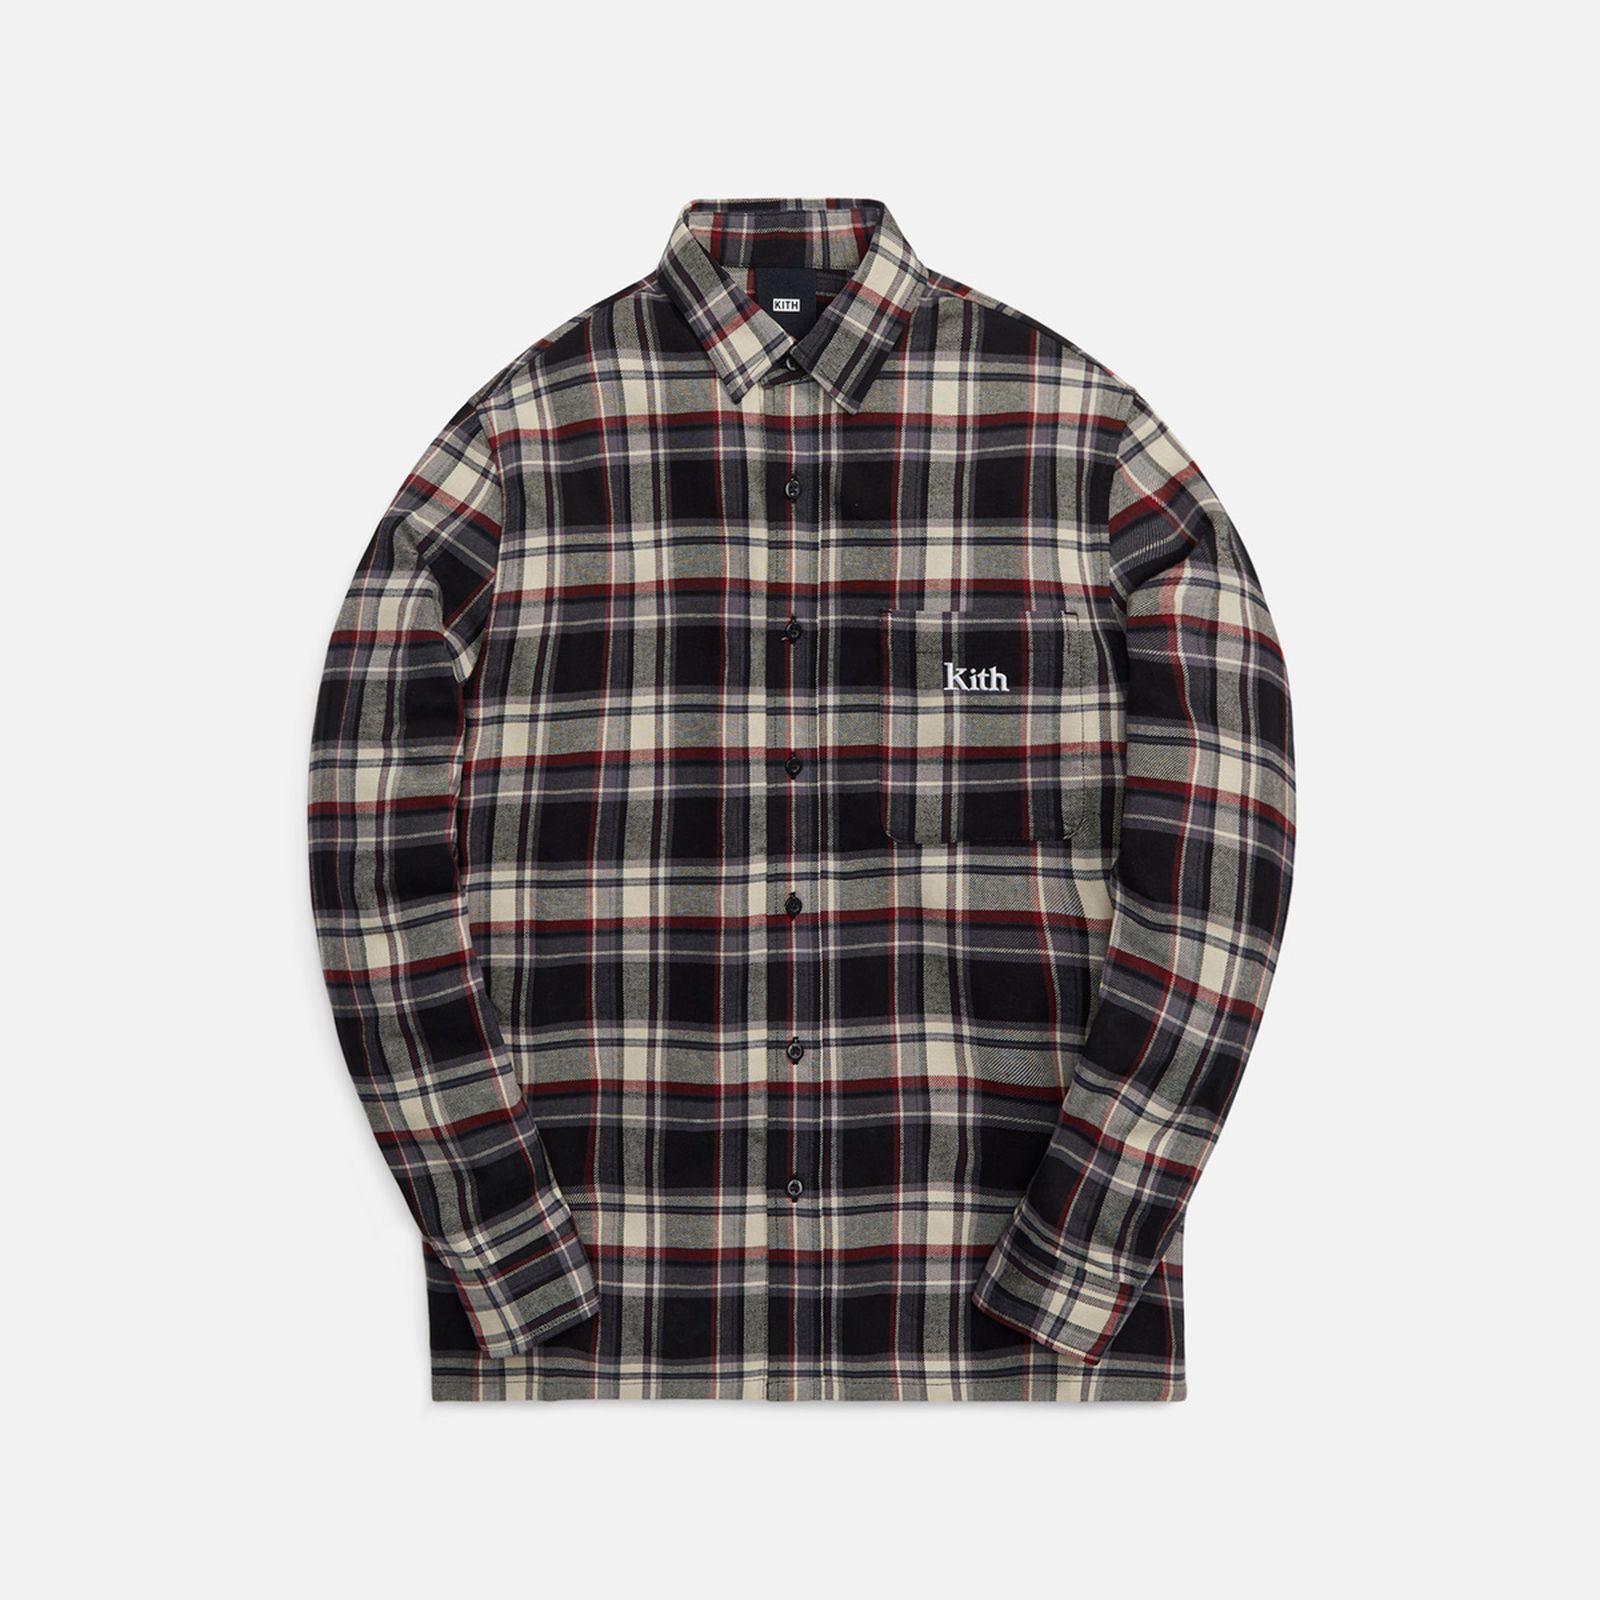 kith-fall-winter-2021-collection-shirts-02